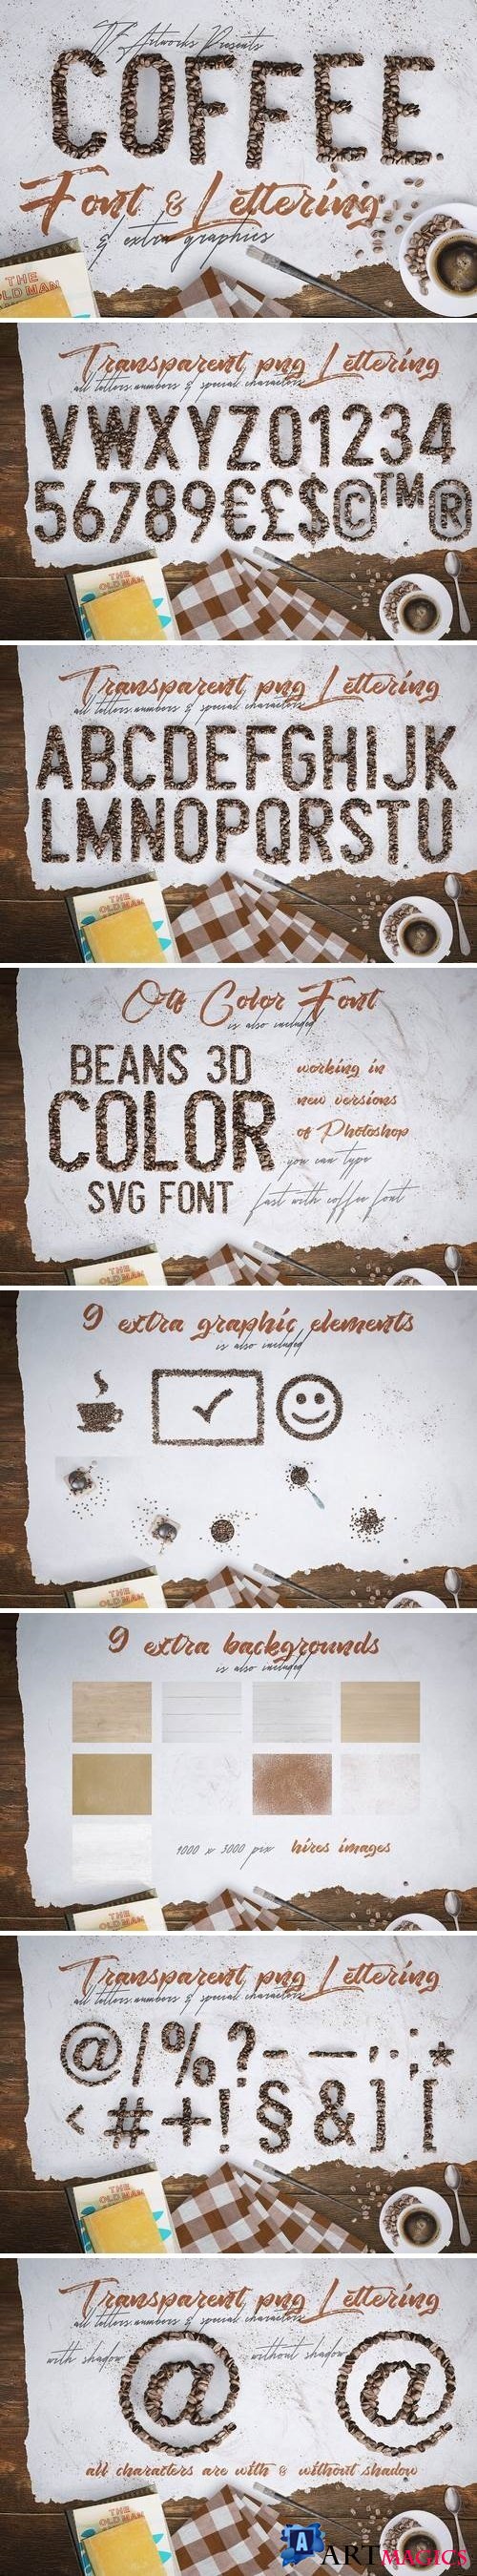 Coffee Beans - Font & Lettering - 3386215